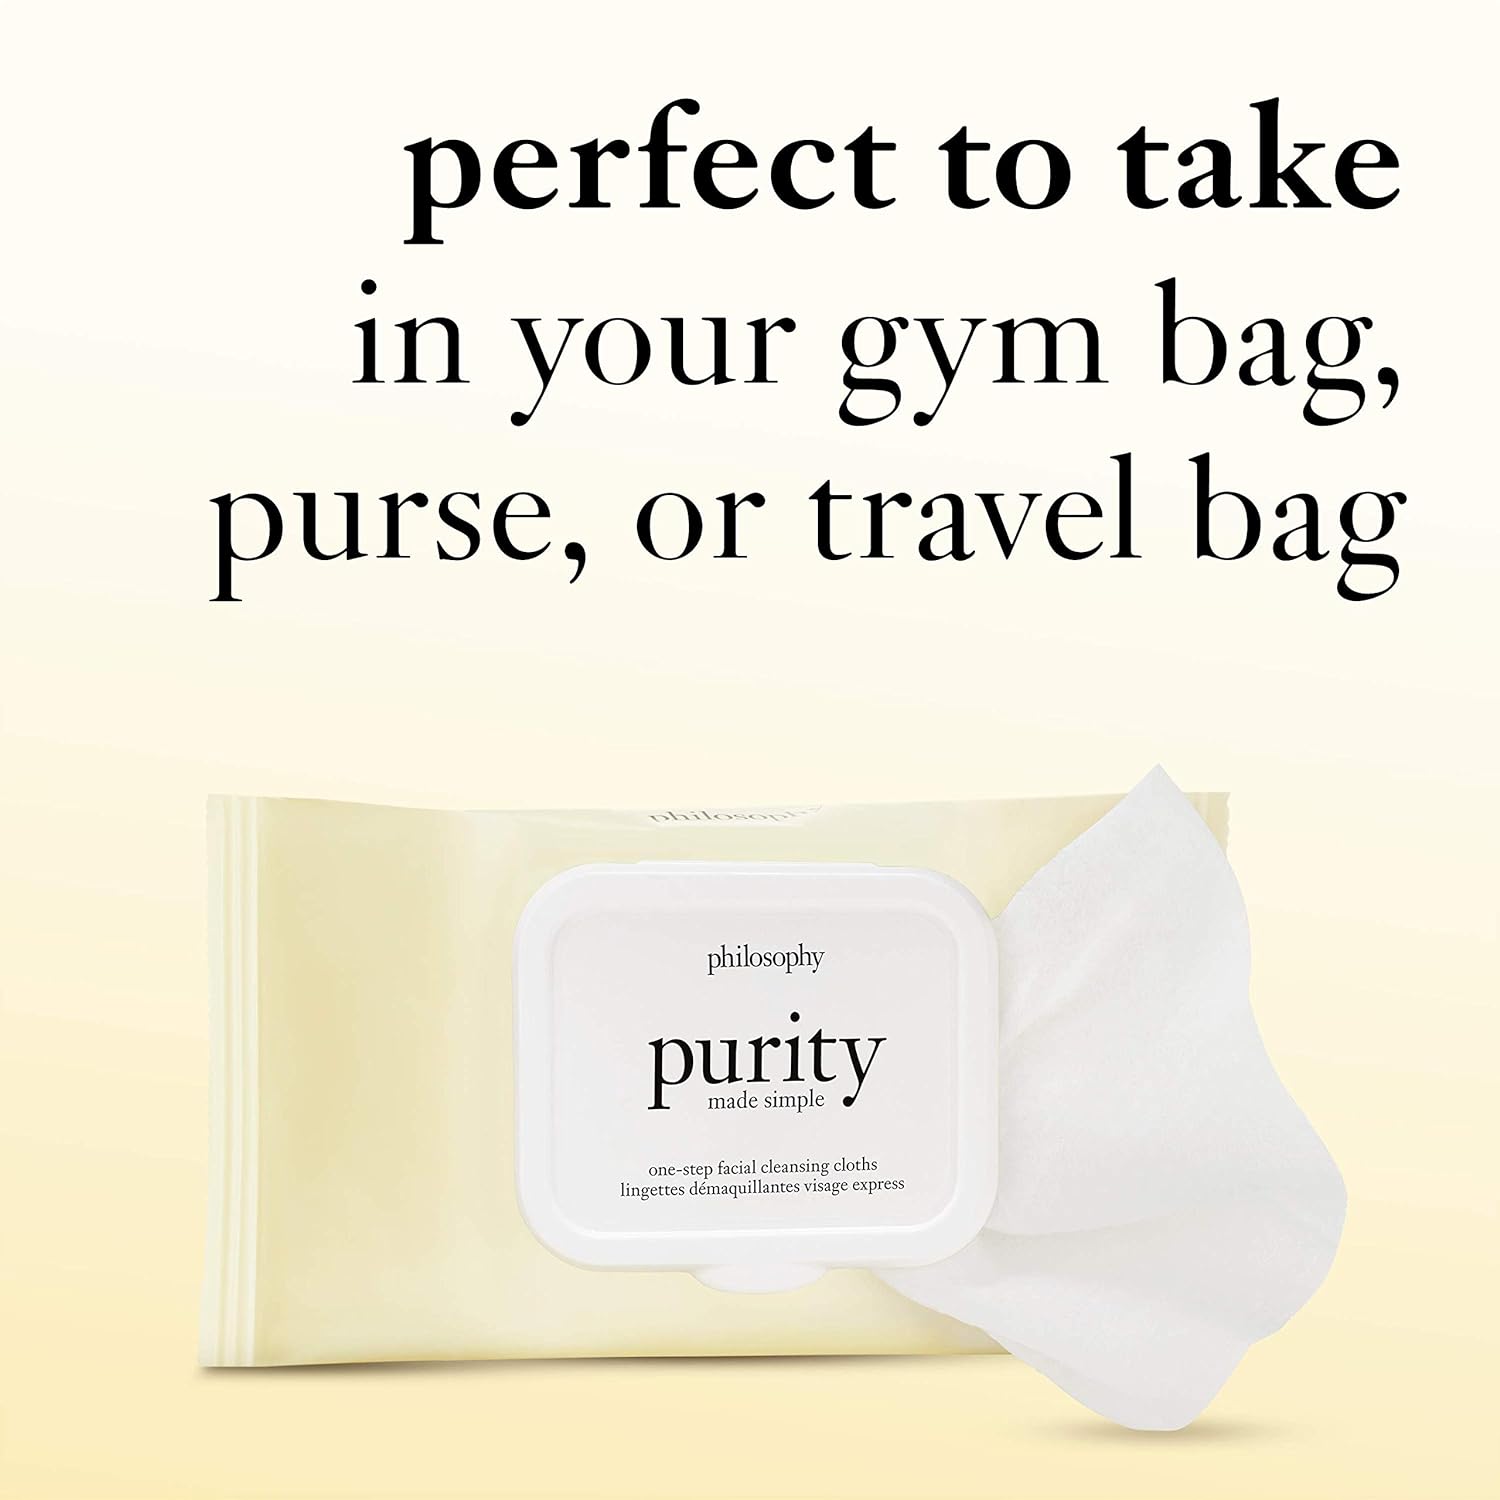 philosophy purity made simple one-step facial cleansing cloths : Beauty & Personal Care